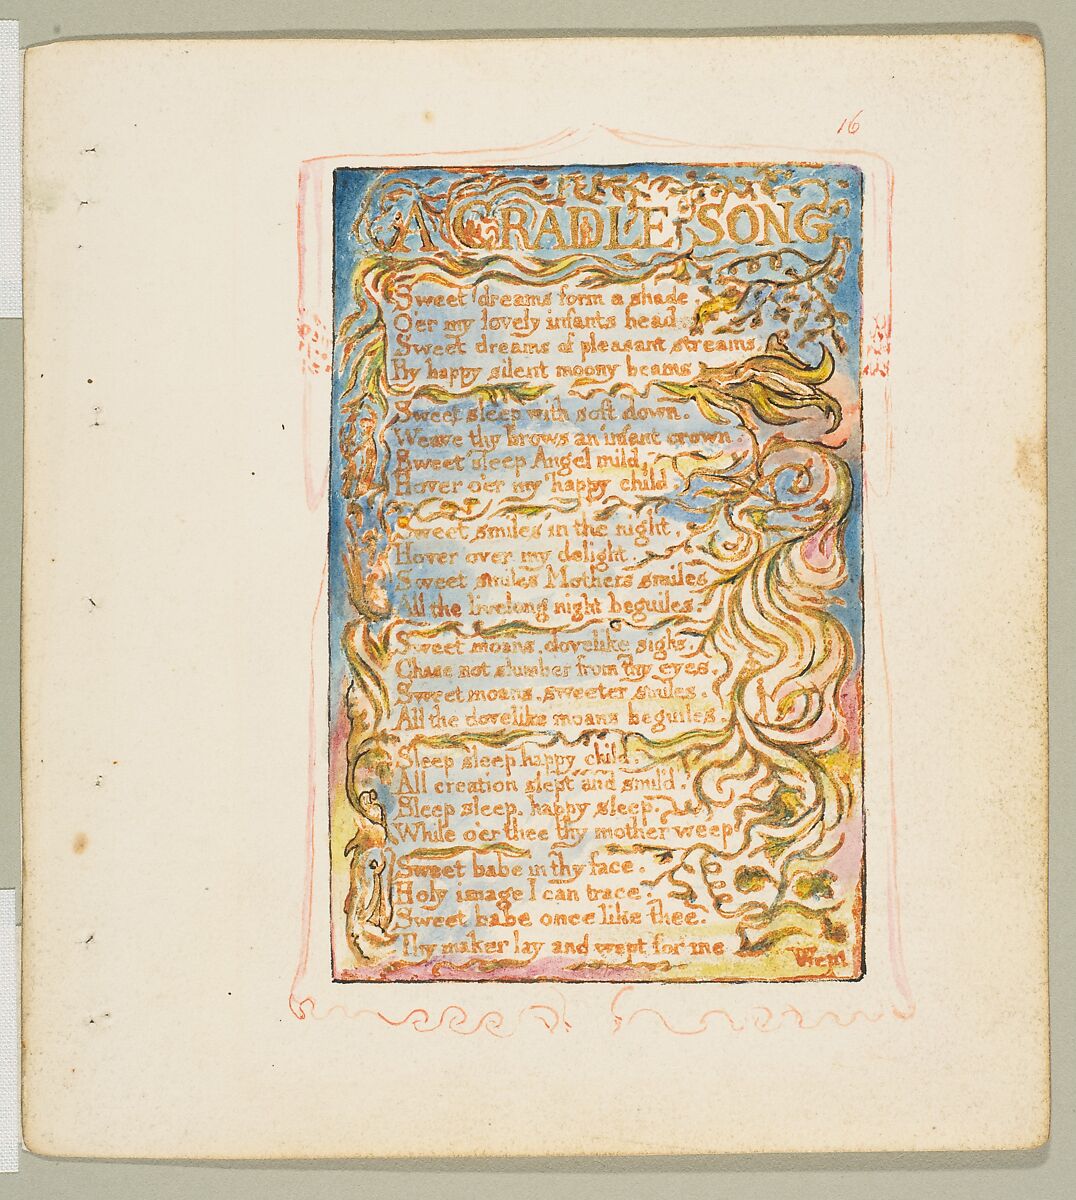 Songs of Innocence: A Cradle Song, William Blake, Relief etching printed in orange-brown ink and hand-colored with watercolor and shell gold